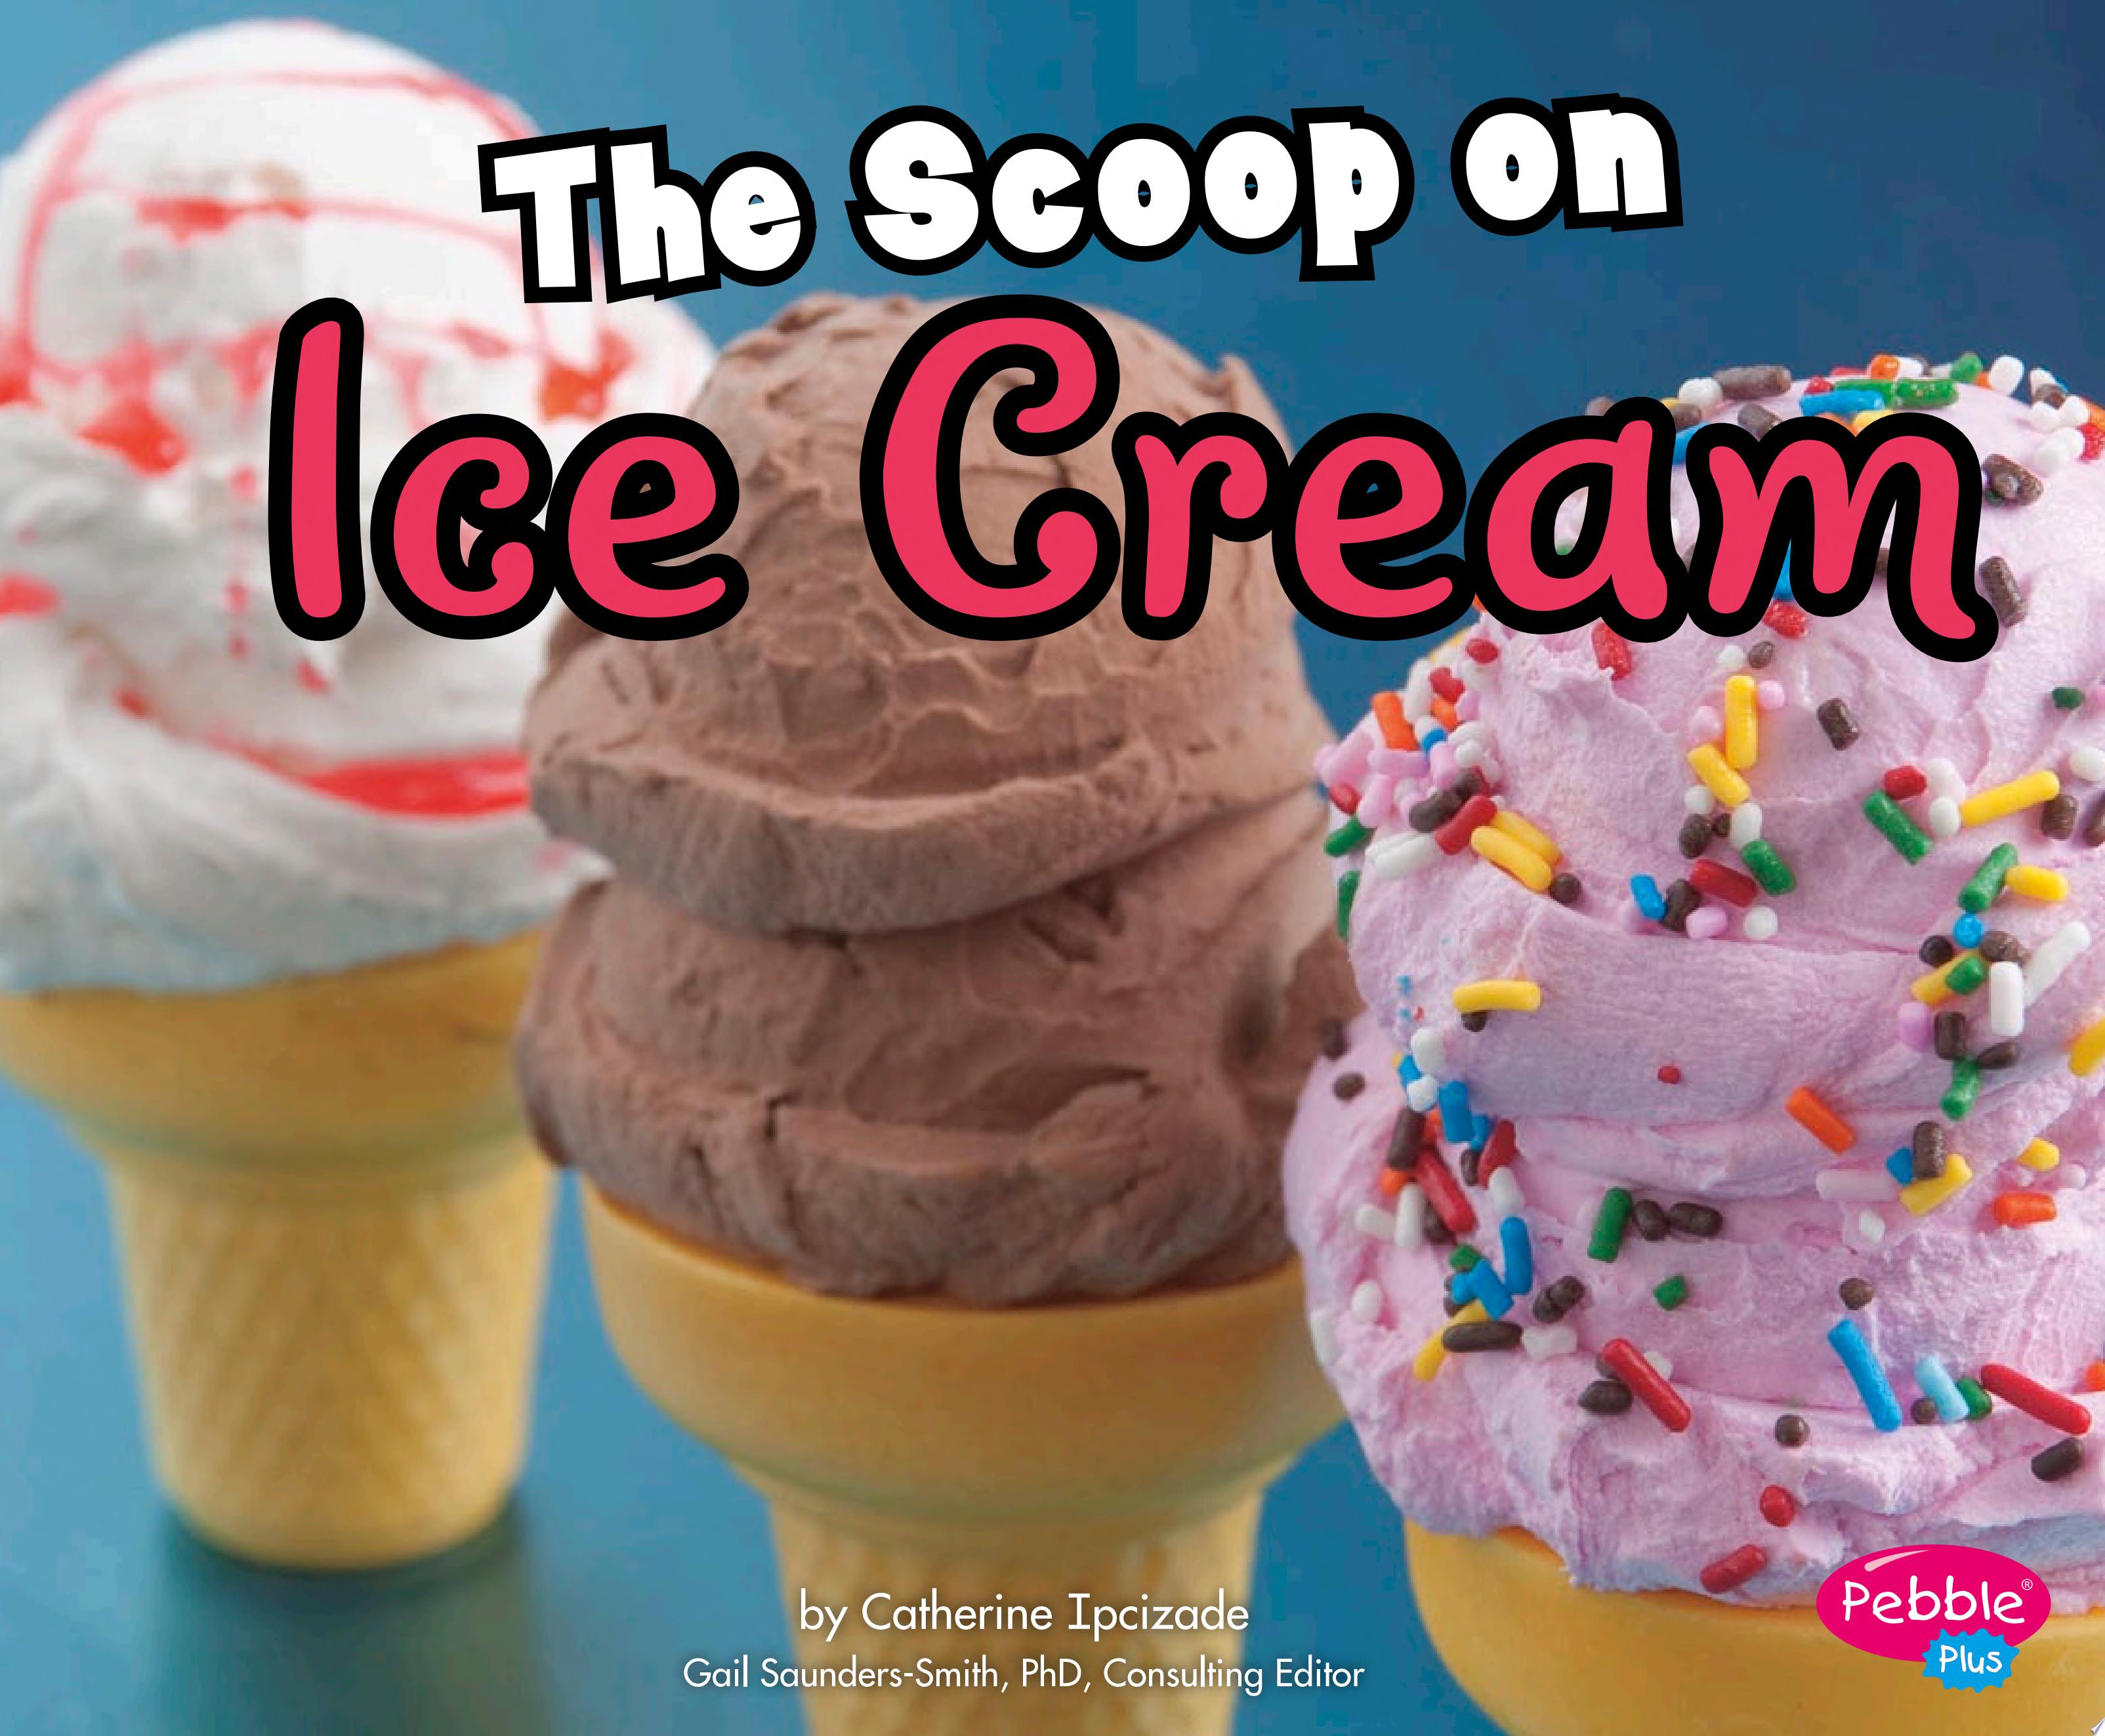 Image for "The Scoop on Ice Cream"